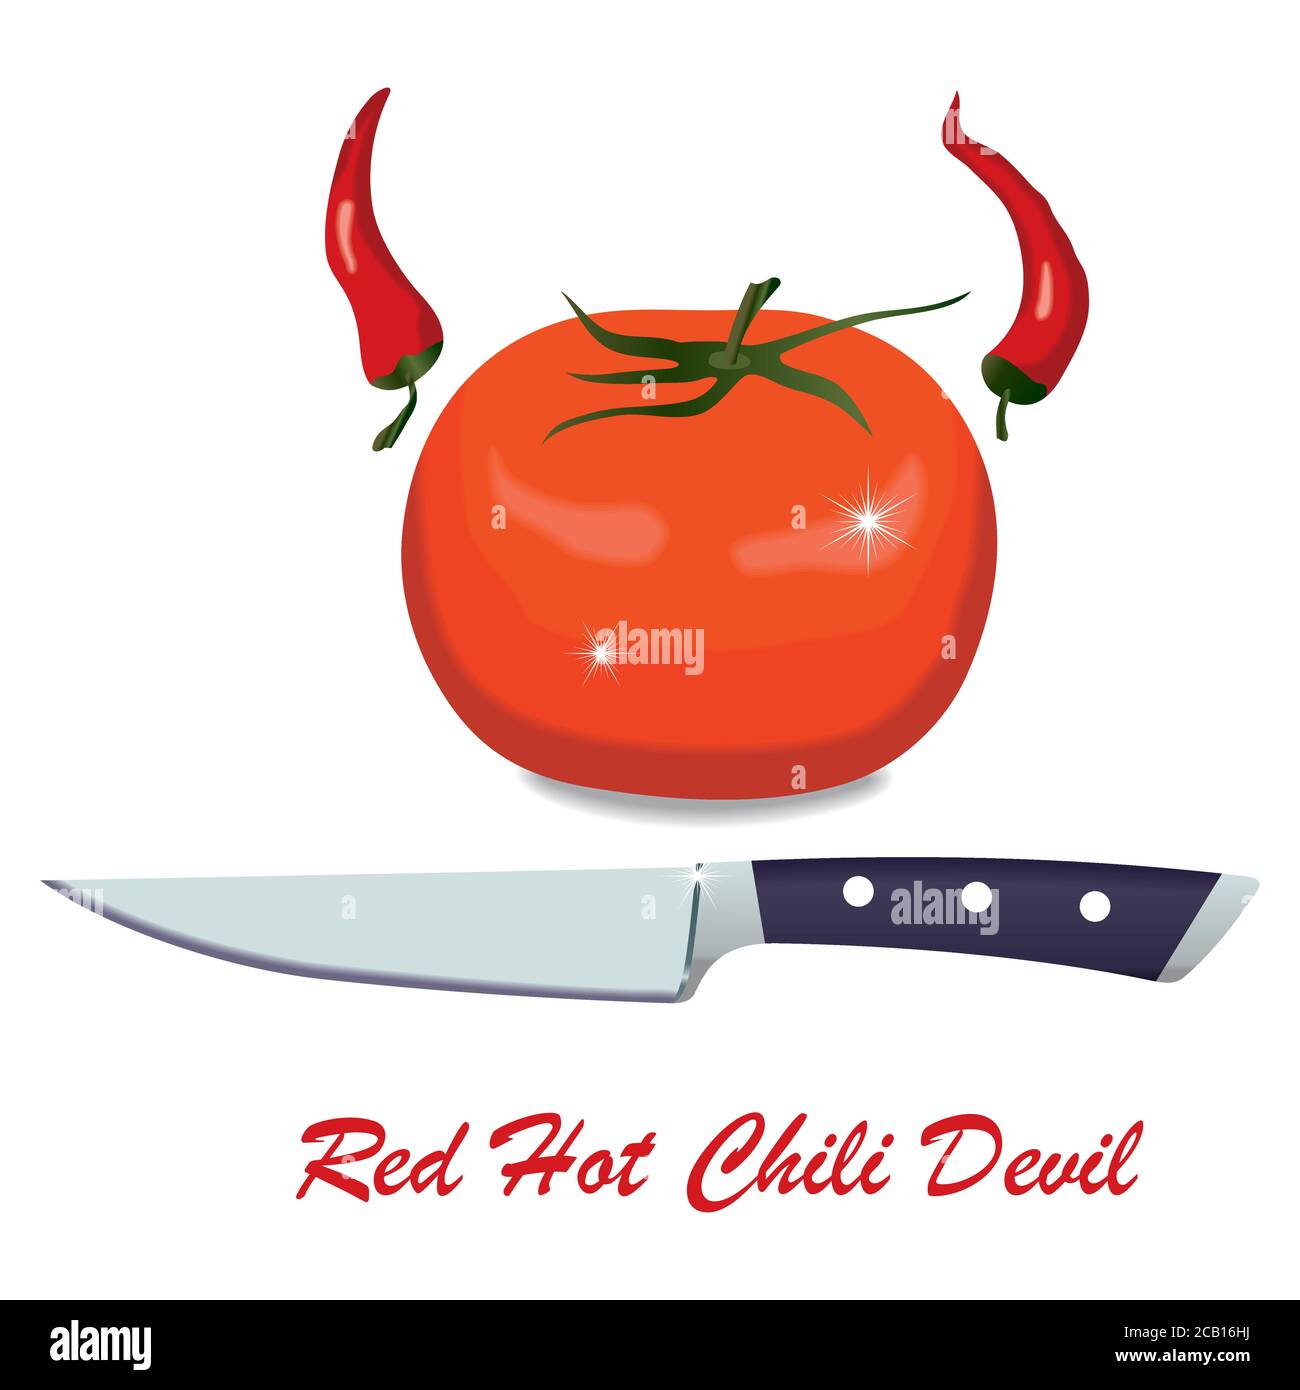 Red Hot Chili Devil. Tomato with red hot peppers on the sides like devil horns. Stock Vector